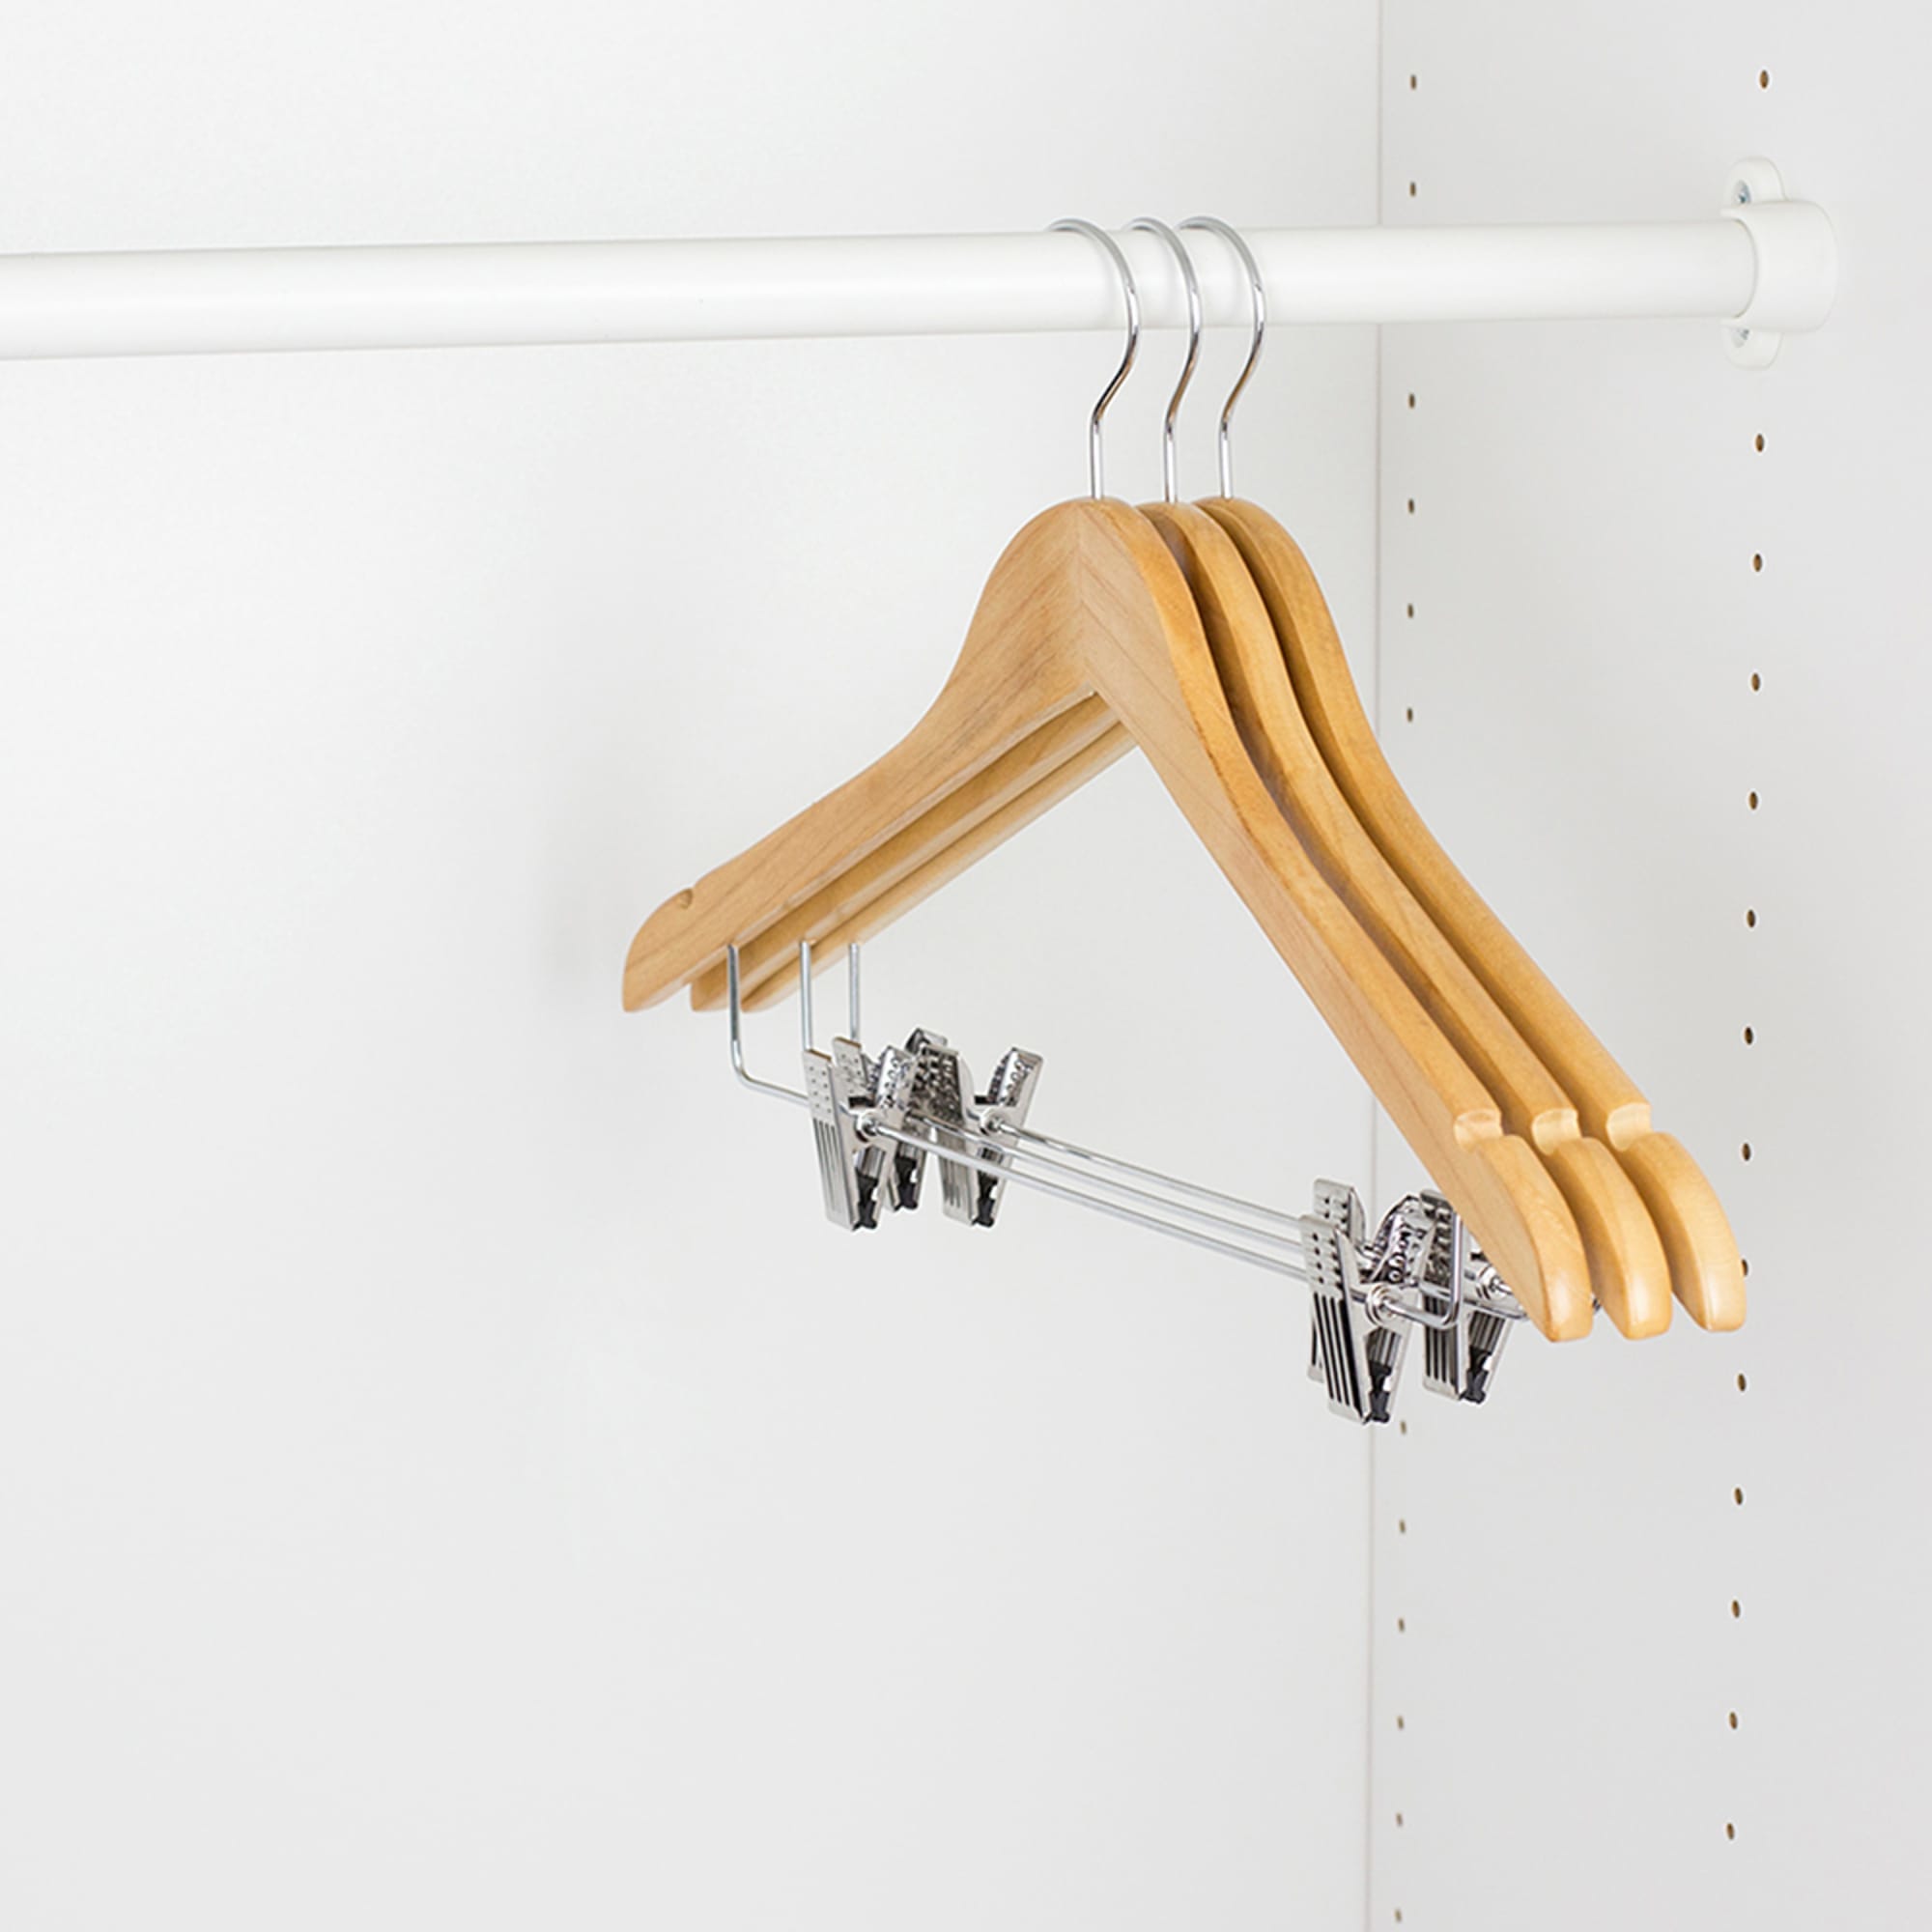 Home Basics Non-Slip Curved Ultra Smooth Wood Hanger with Metal Clips, (Pack of 3), Natural $4.00 EACH, CASE PACK OF 24